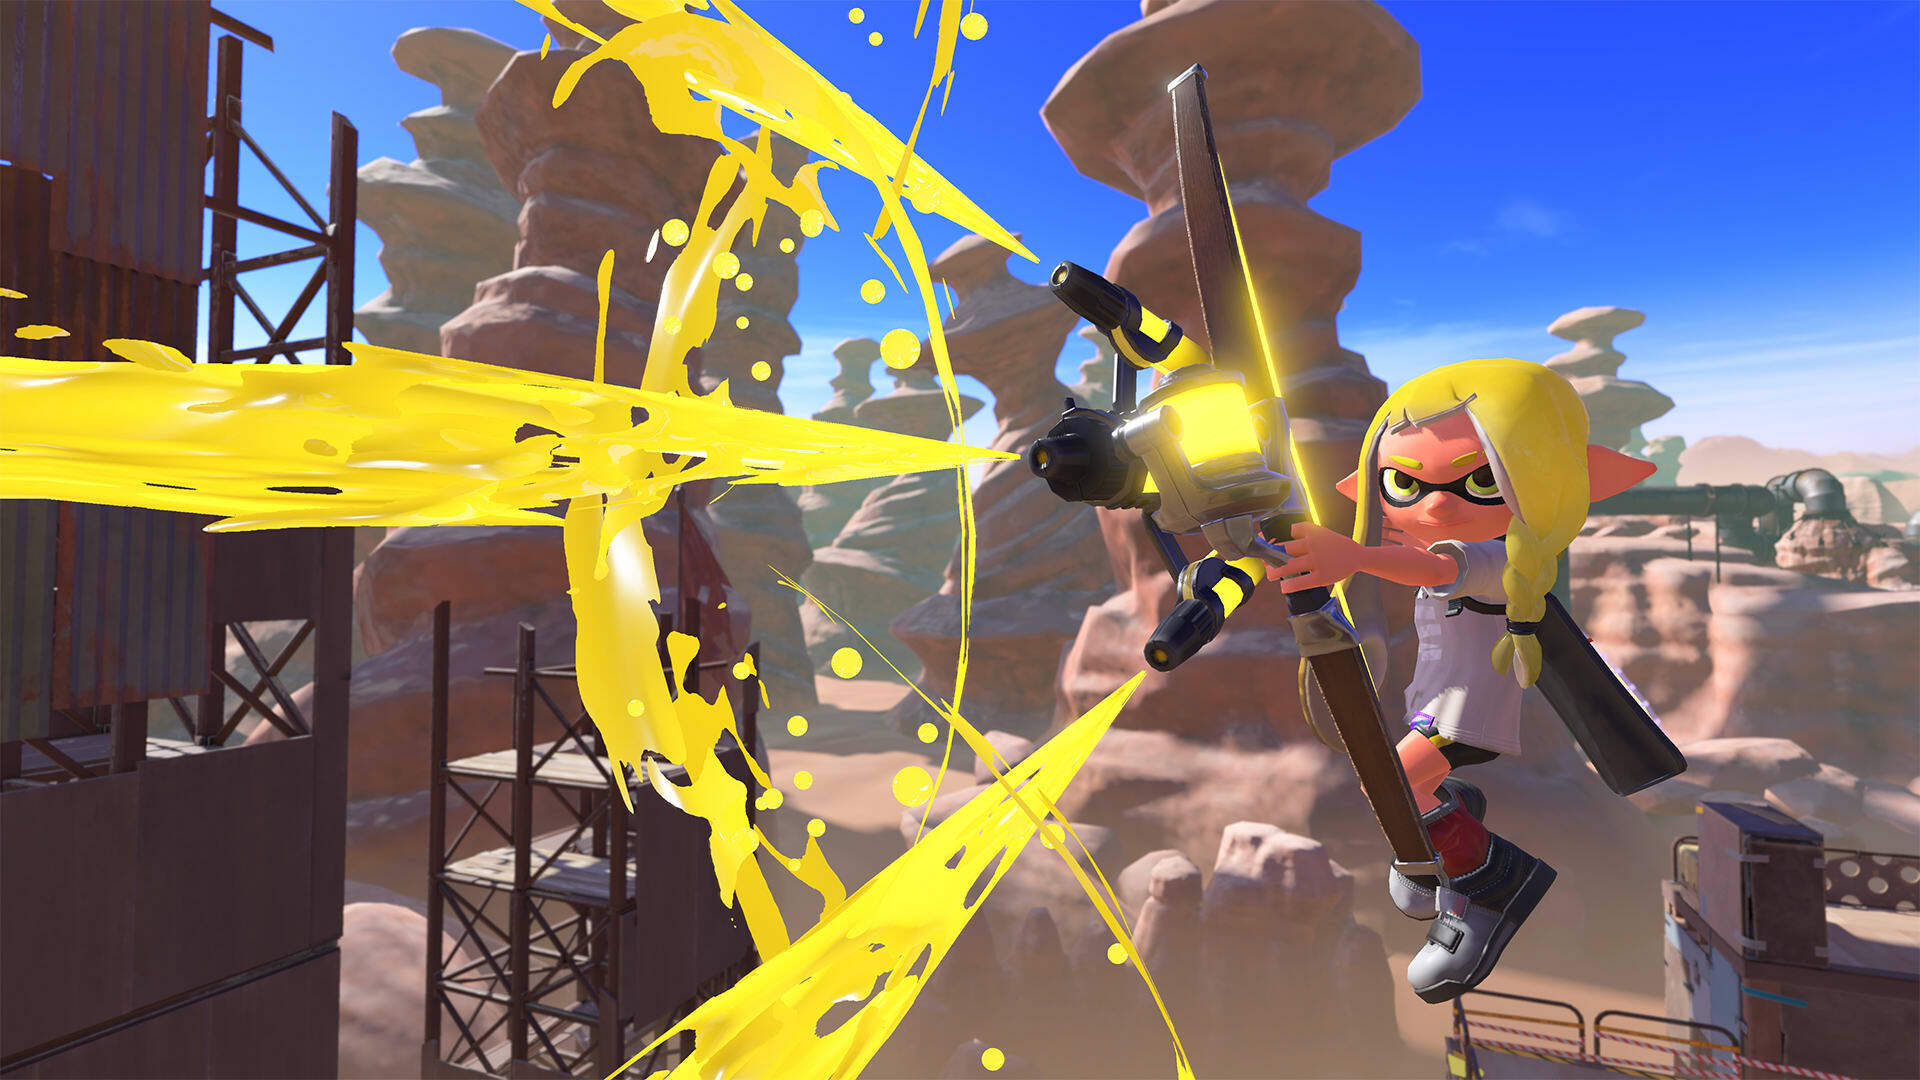 The Stringer bow, a new weapon being introduced in Splatoon 3